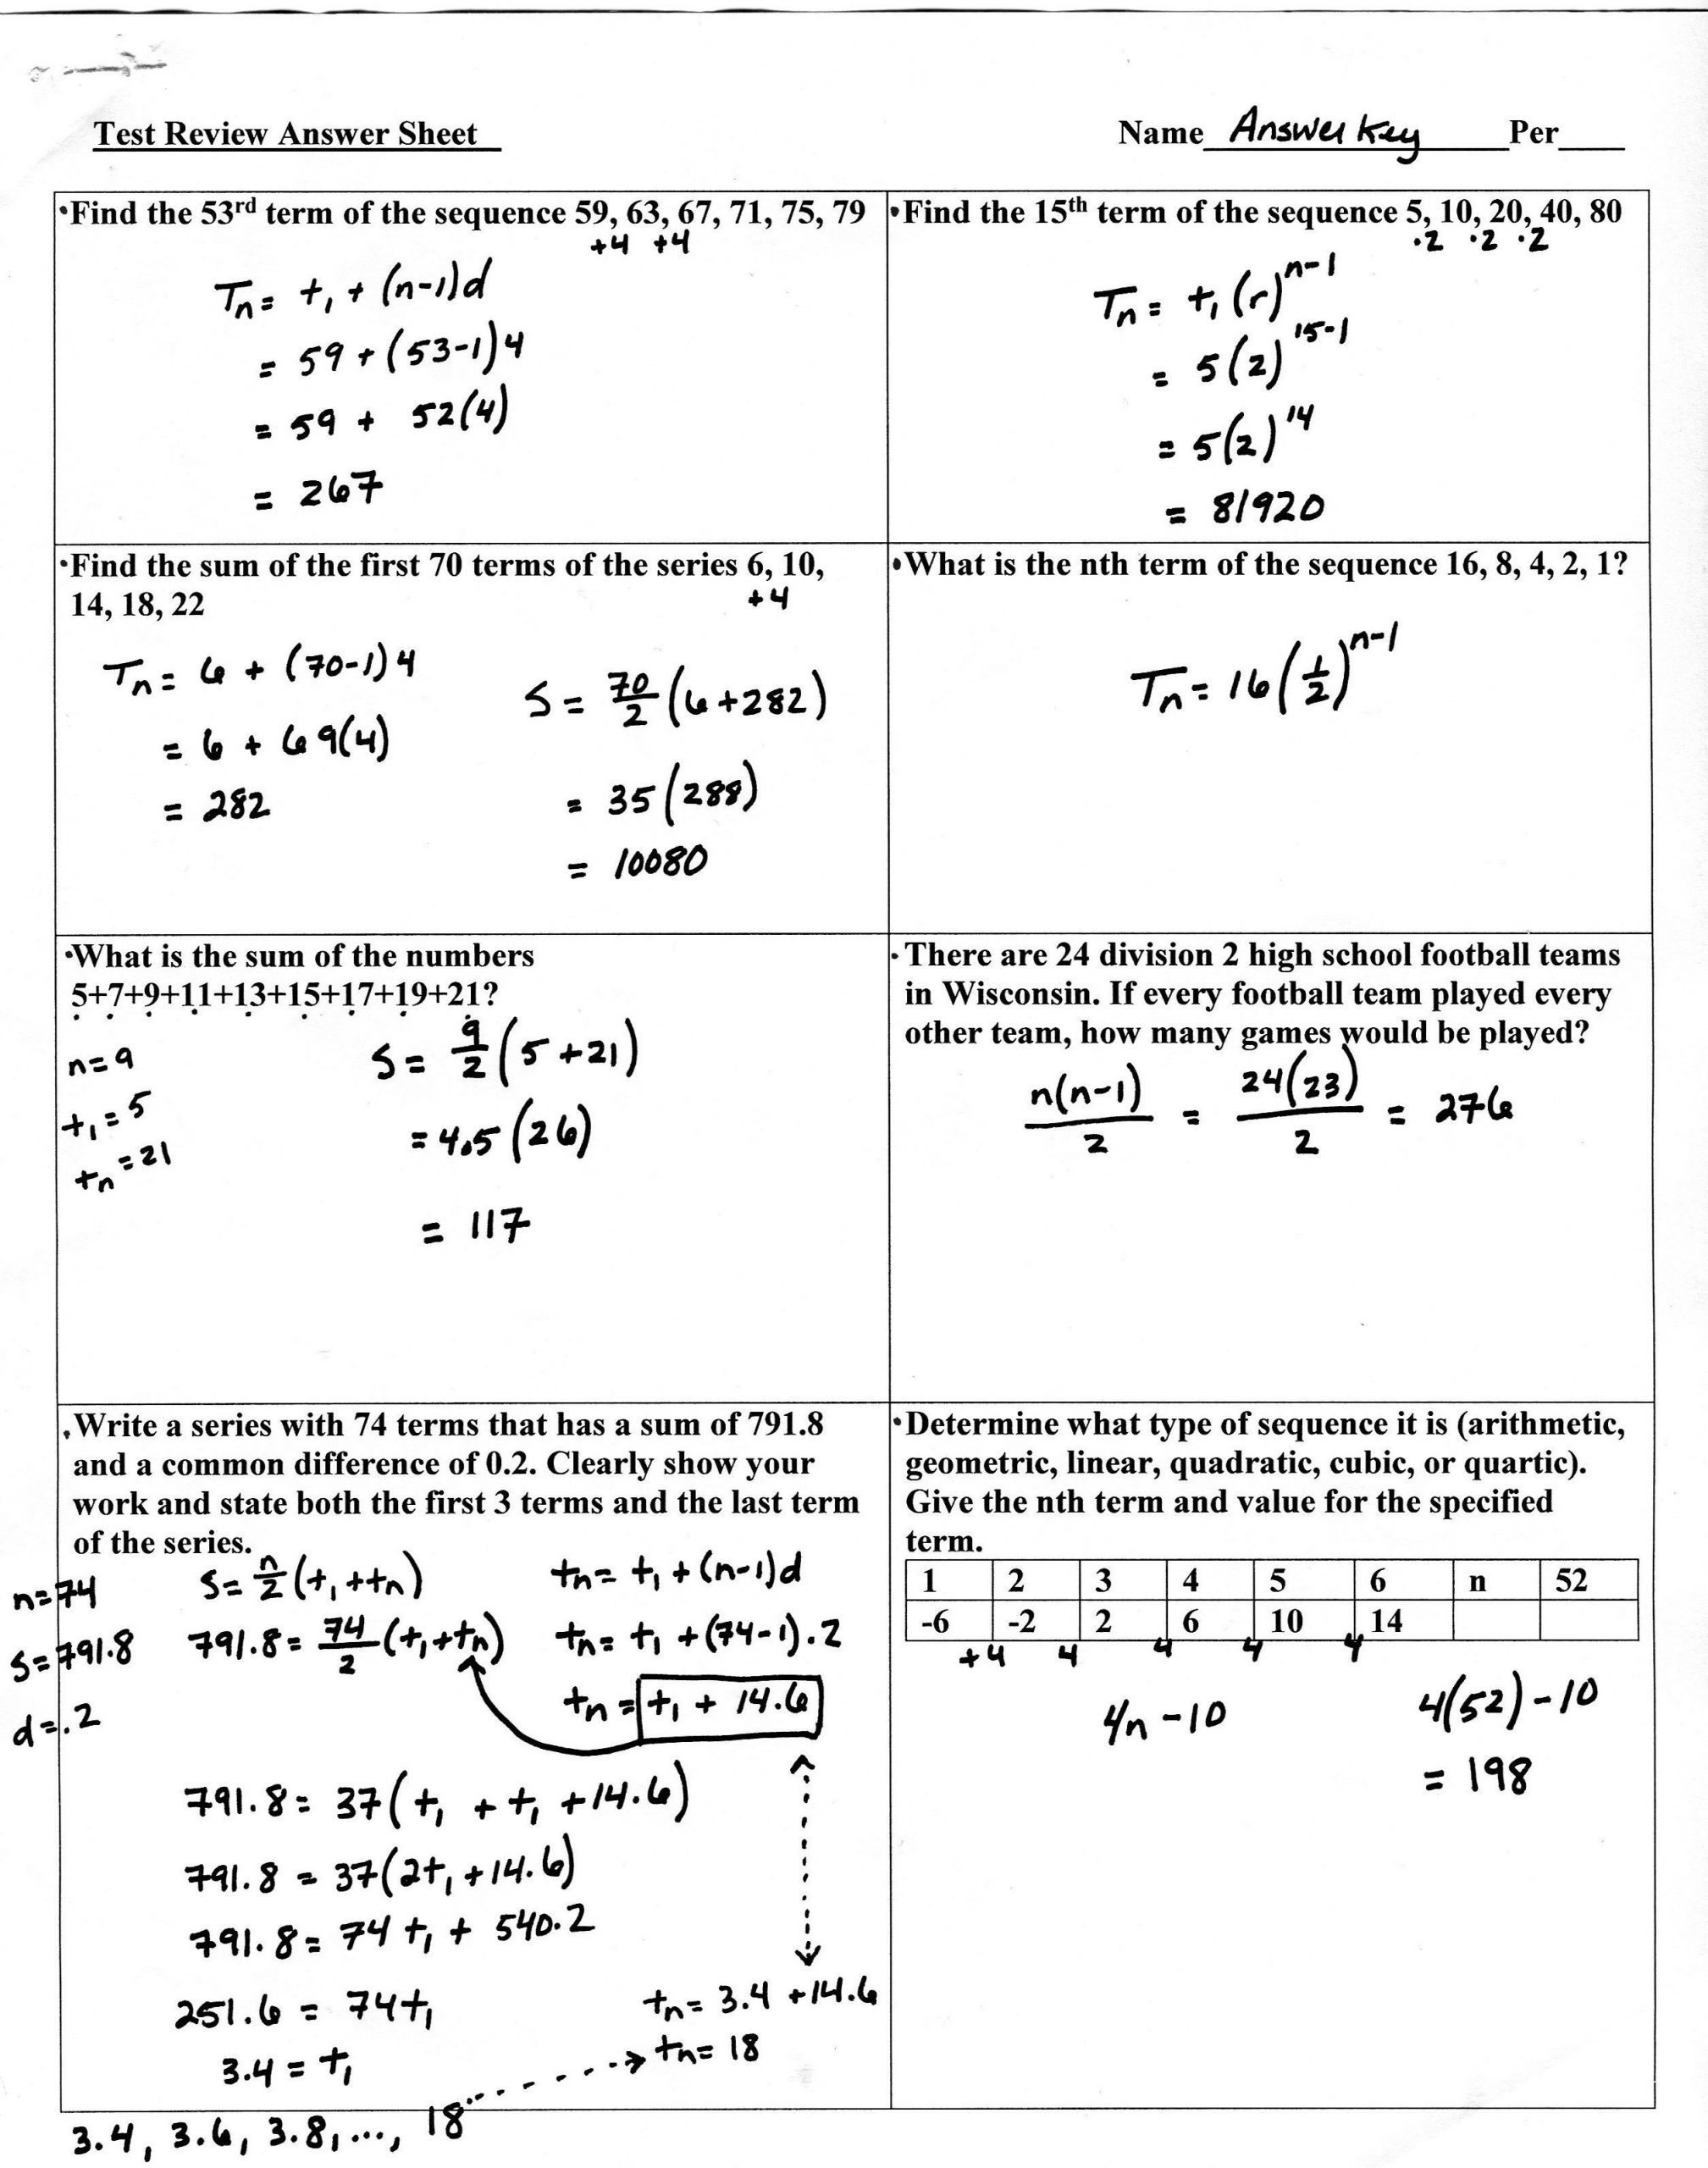 Arithmetic Sequence Worksheet Algebra 1 Sequences and Series Review Page 1 25143191